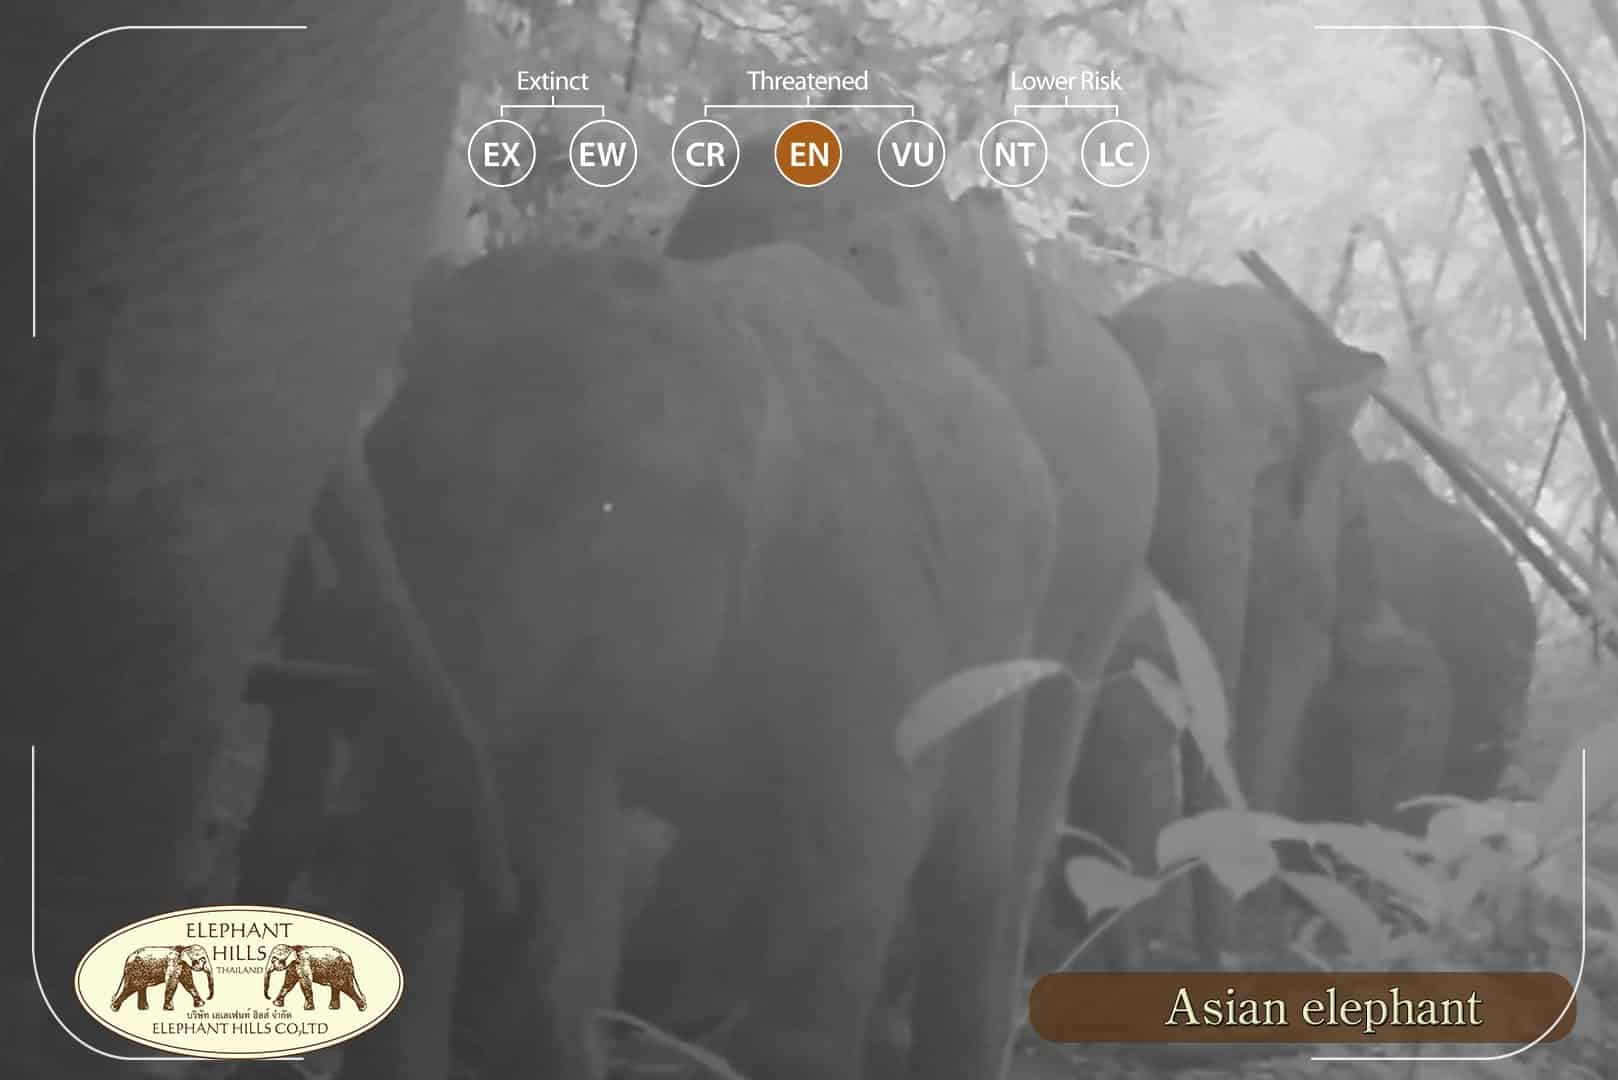 Elephant herd in Elephant Hills’ camera of Wildlife Monitoring Project